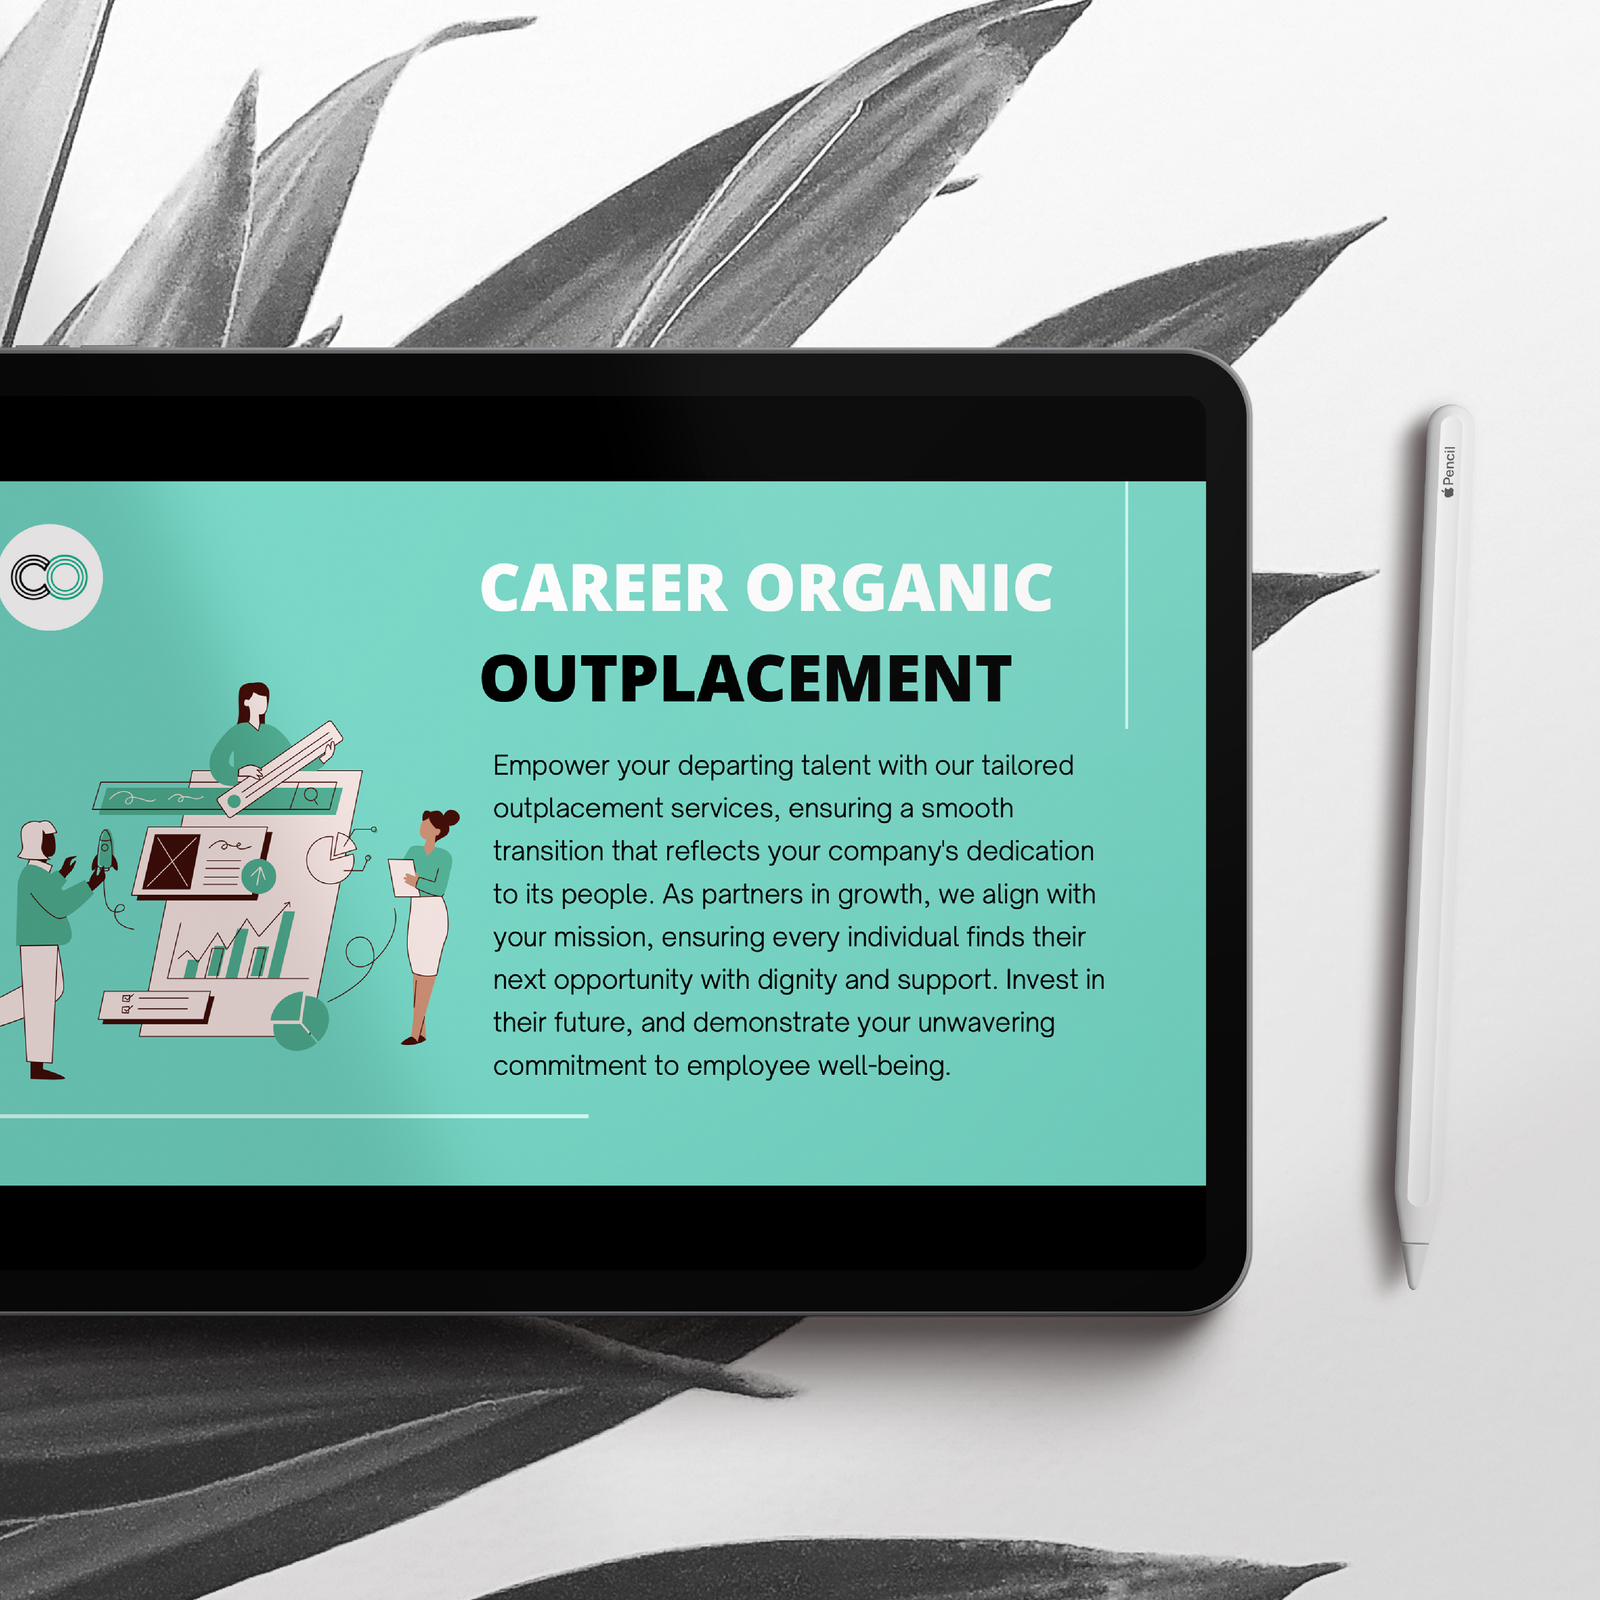 ipad with an outplacement deck by Career Organic on the screen on a floral background